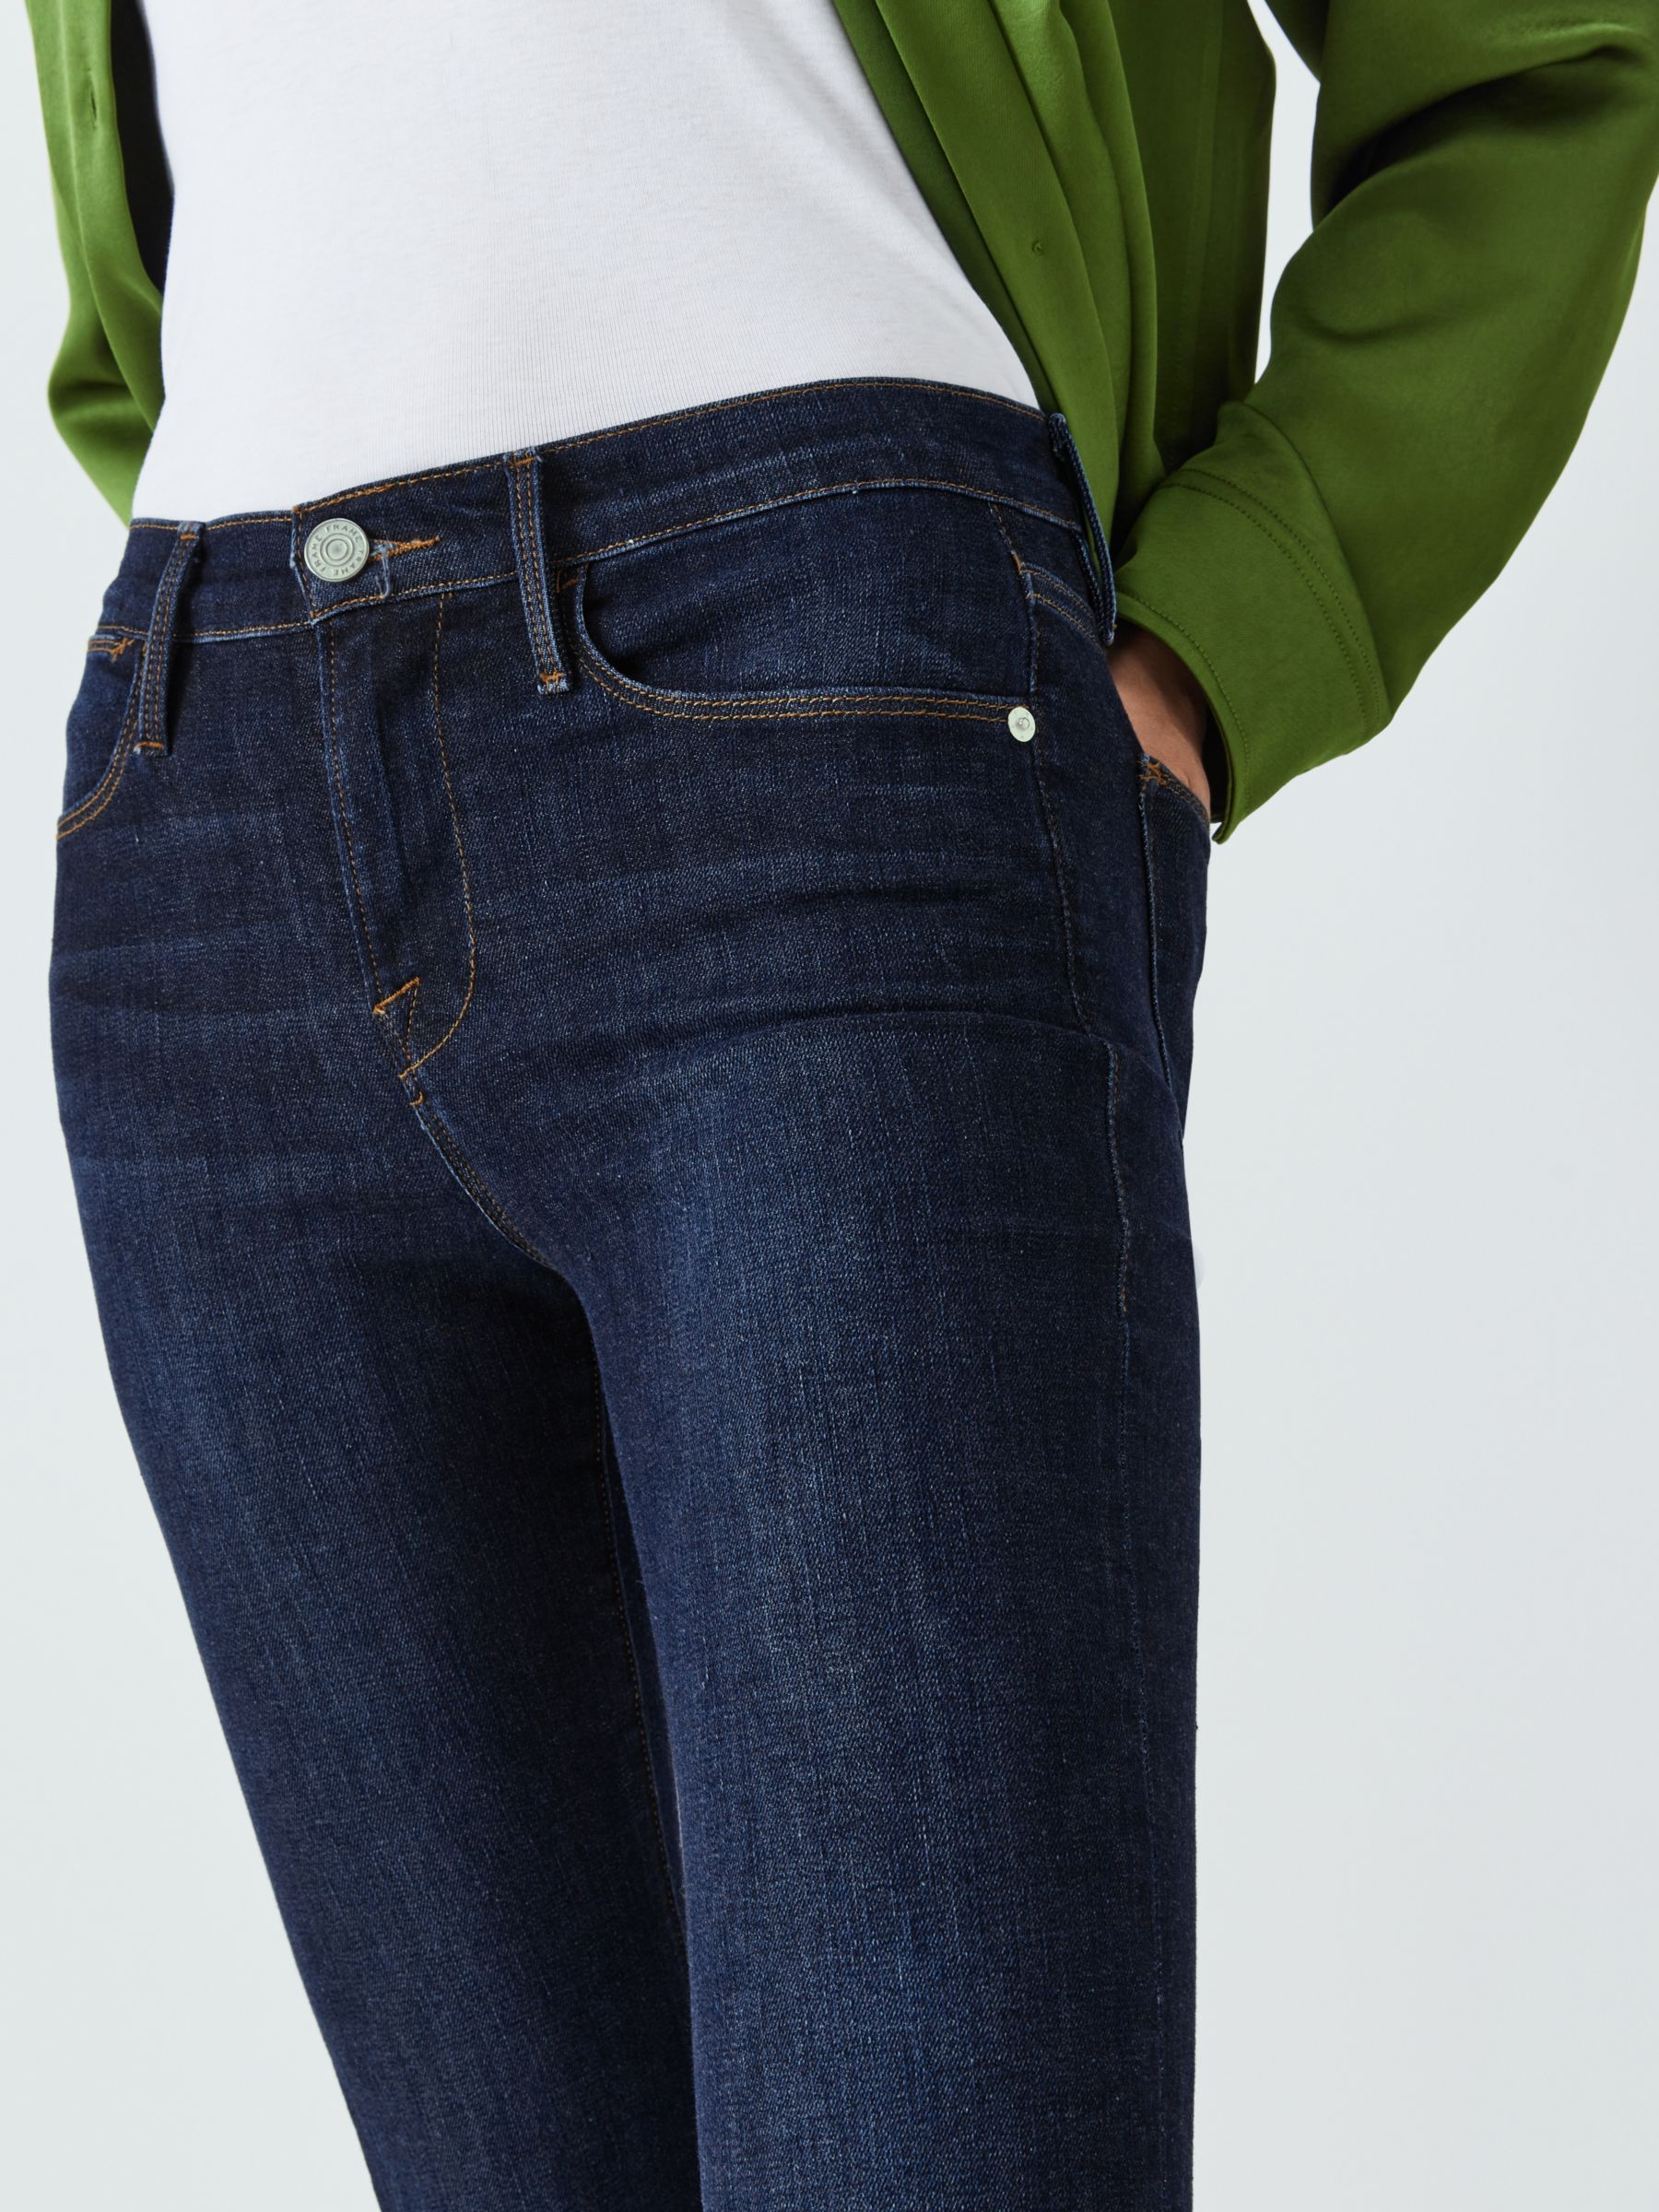 FRAME Le High Flare Jeans, Sutherland at John Lewis & Partners